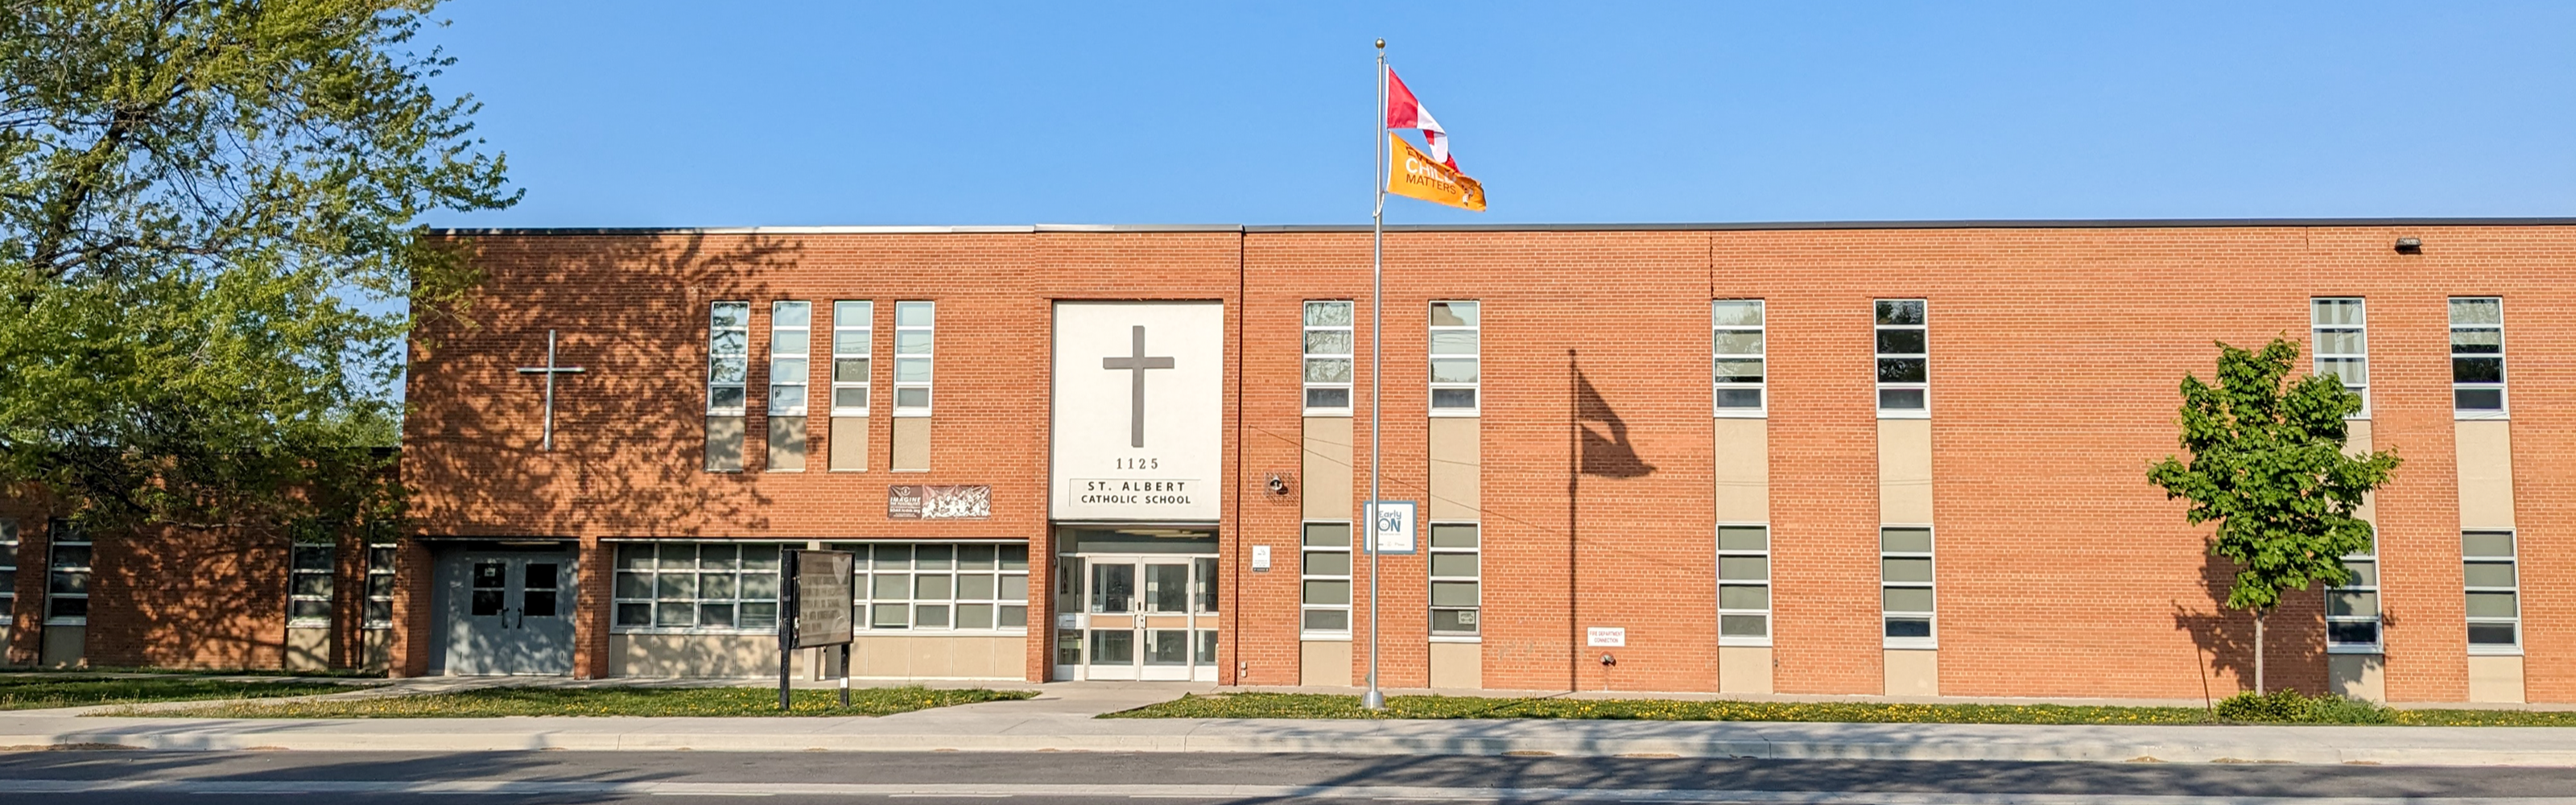 The front of the St. Albert Catholic School building